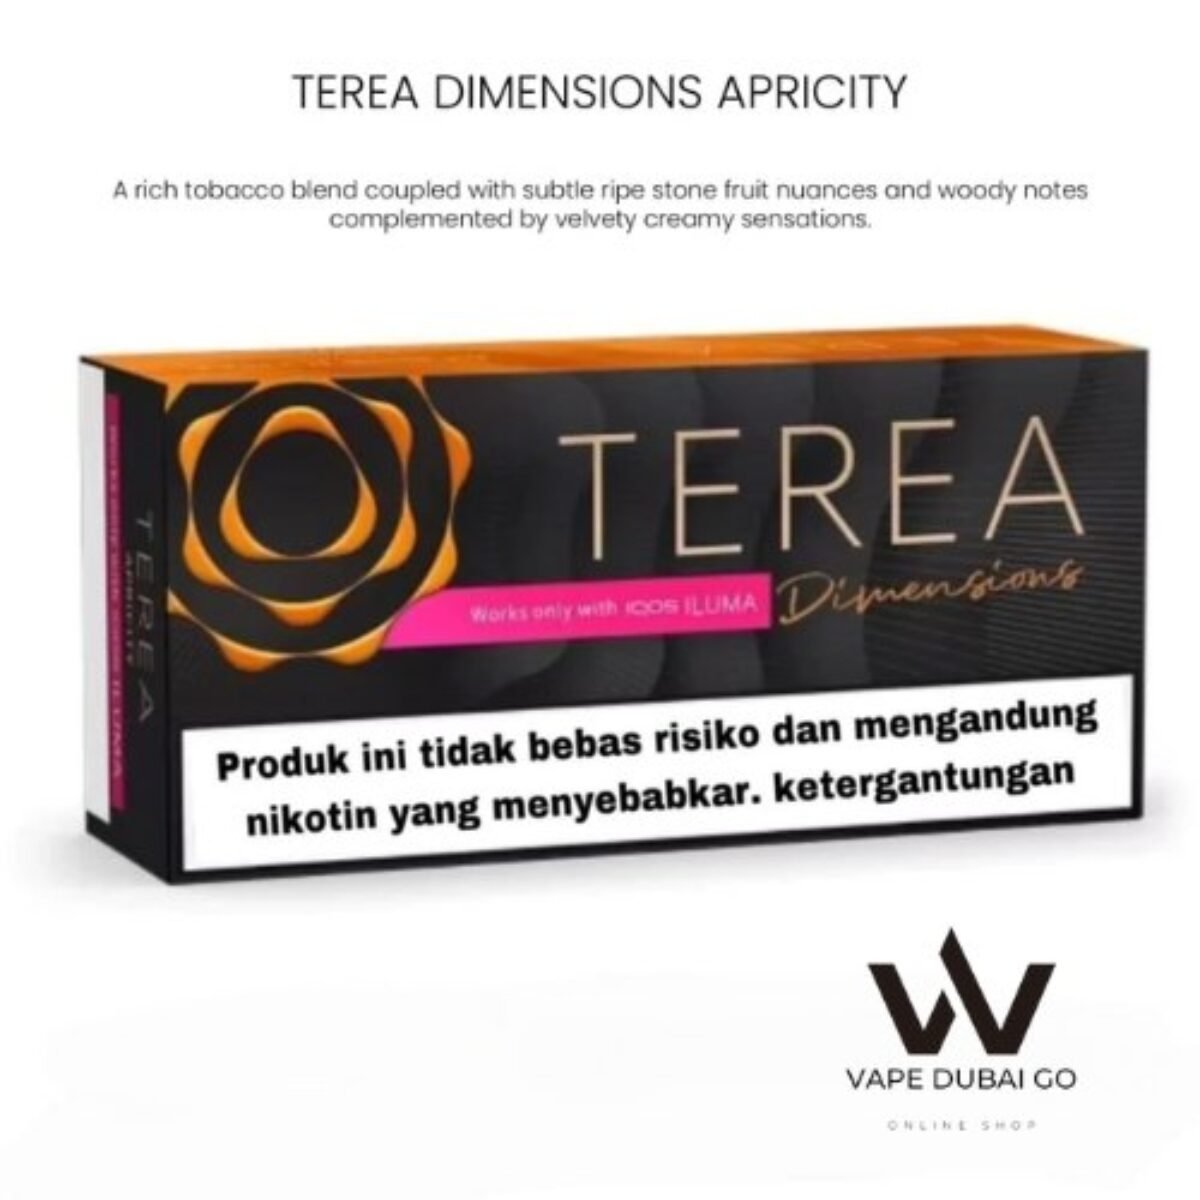 Discover IQOS TEREA Indonesia Dimensions Apricity